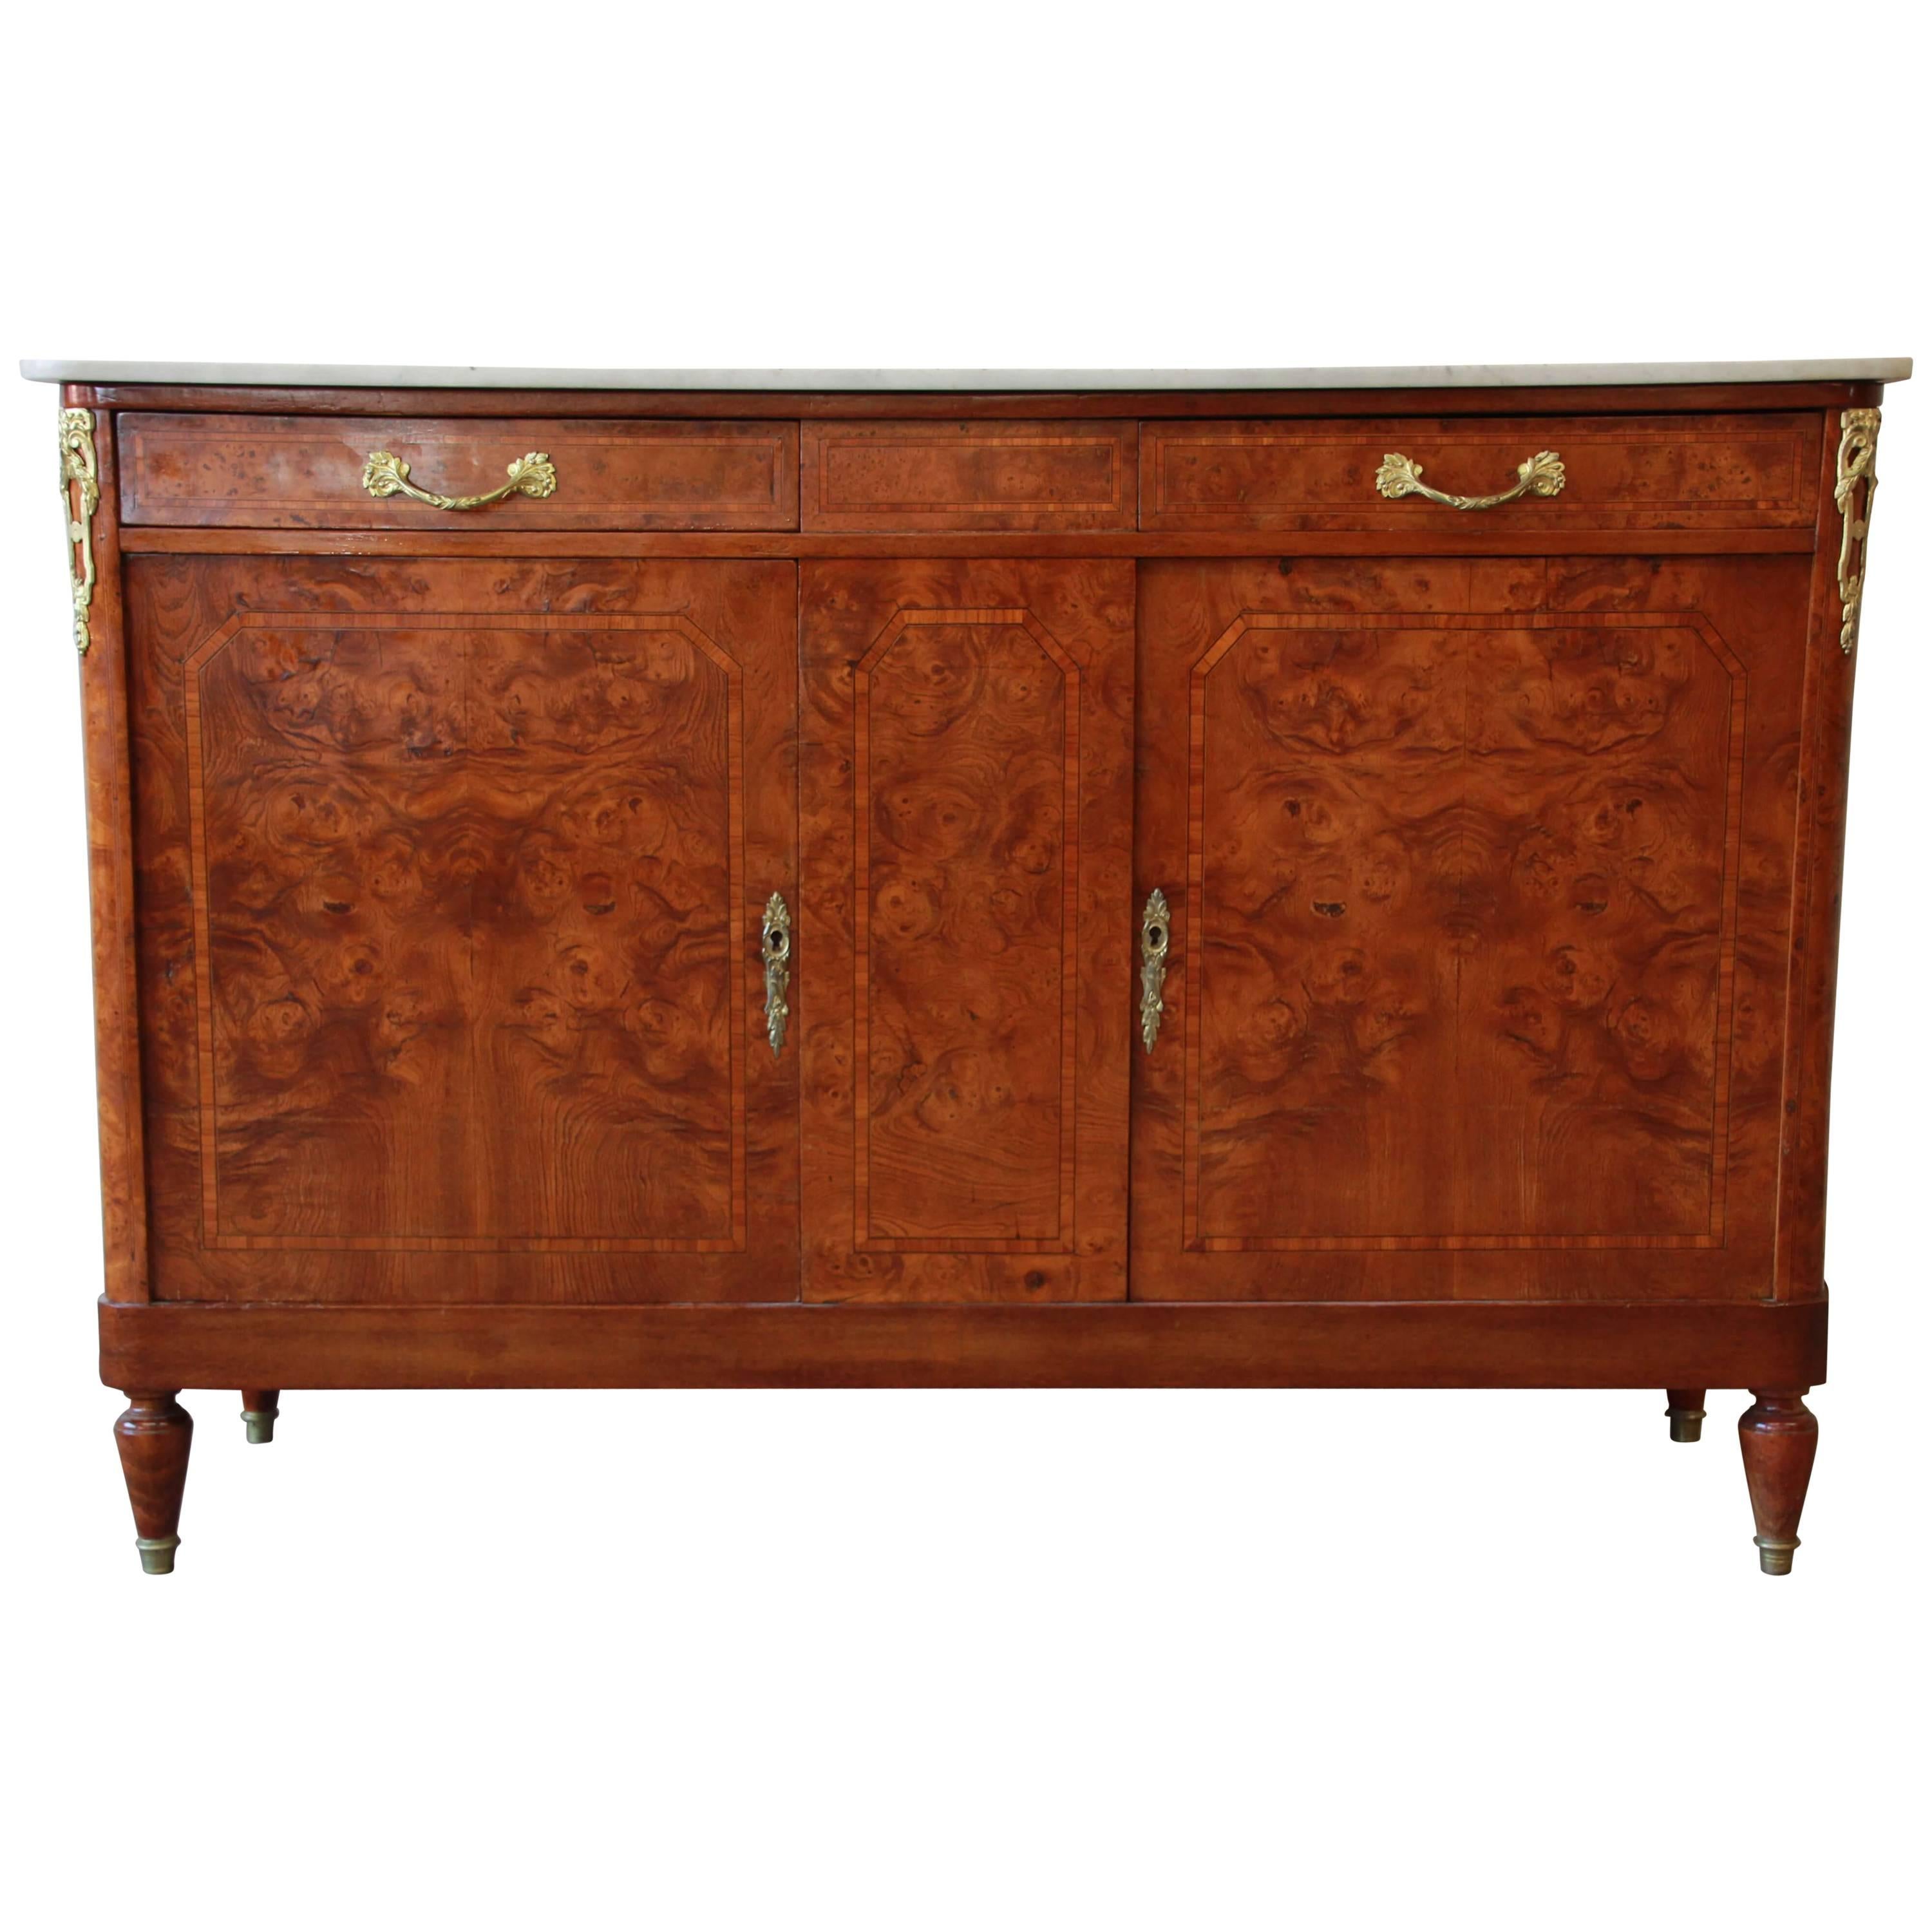 Antique Louis XVI Style Burl Wood Marble-Top Sideboard Credenza